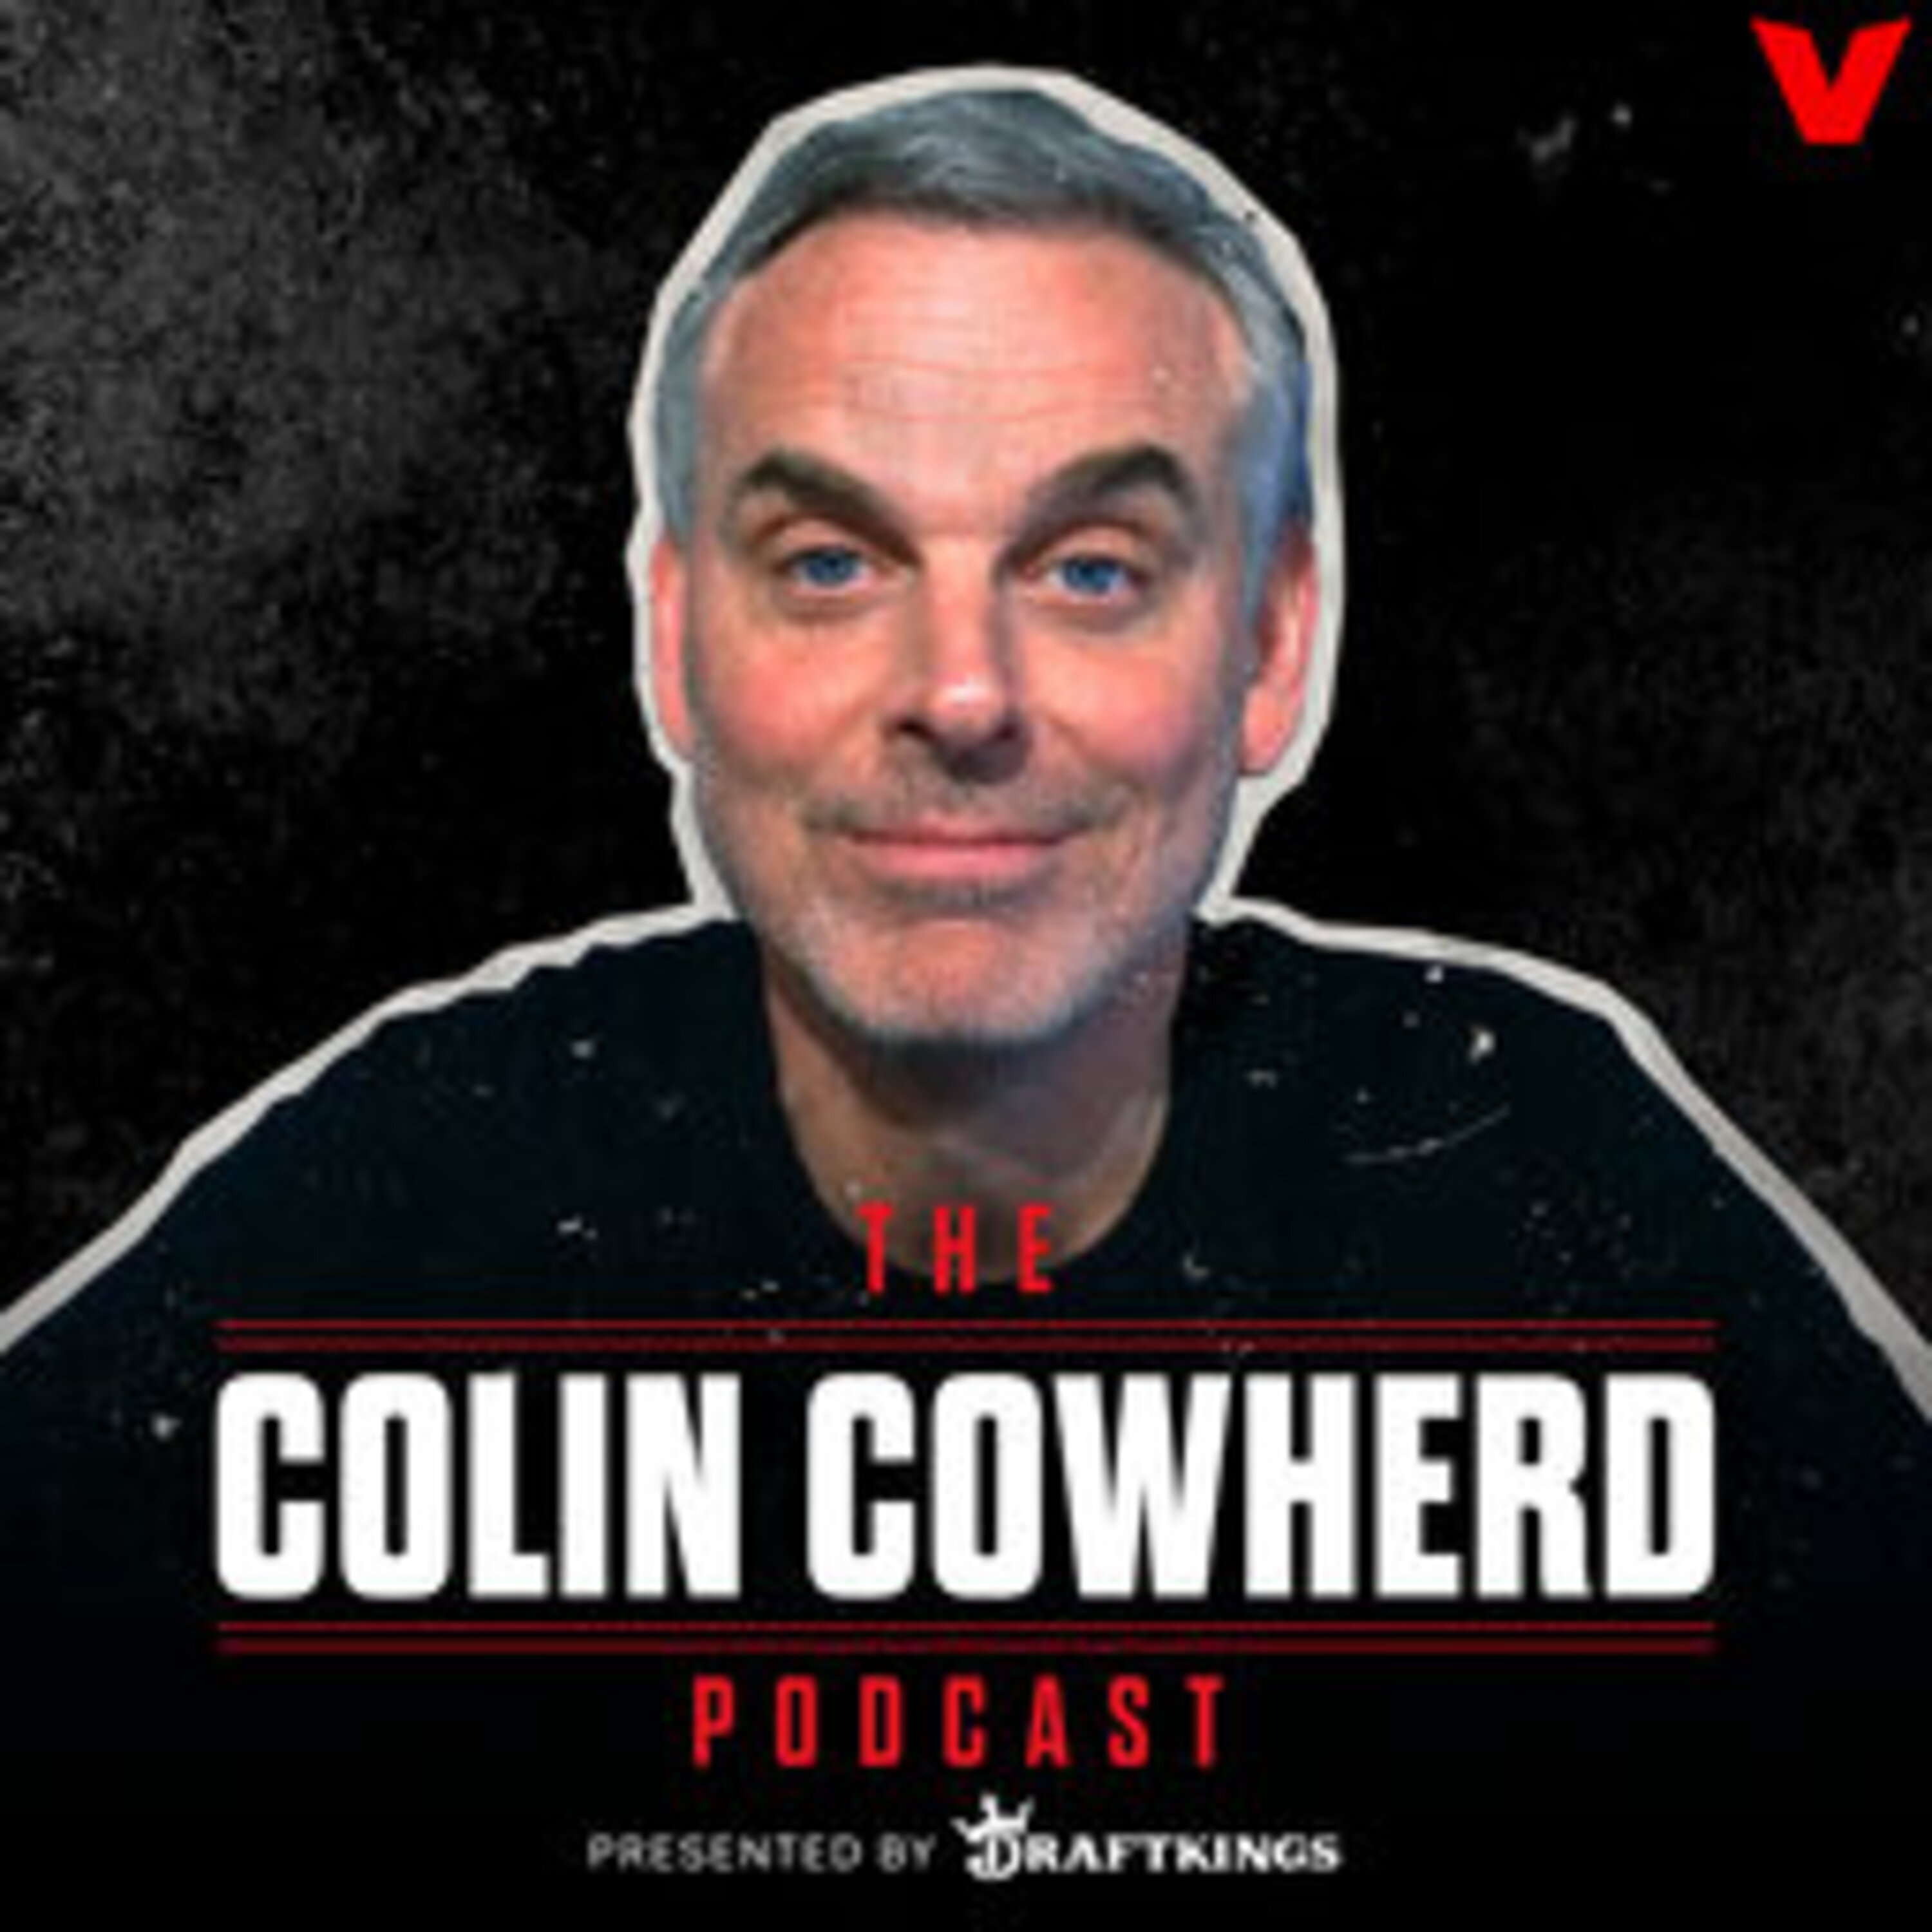 Colin Cowherd Podcast - Nick Wright Part 2: NFL Taking Over Xmas day, The Difference Between LeBron and Durant, Best Team In The West